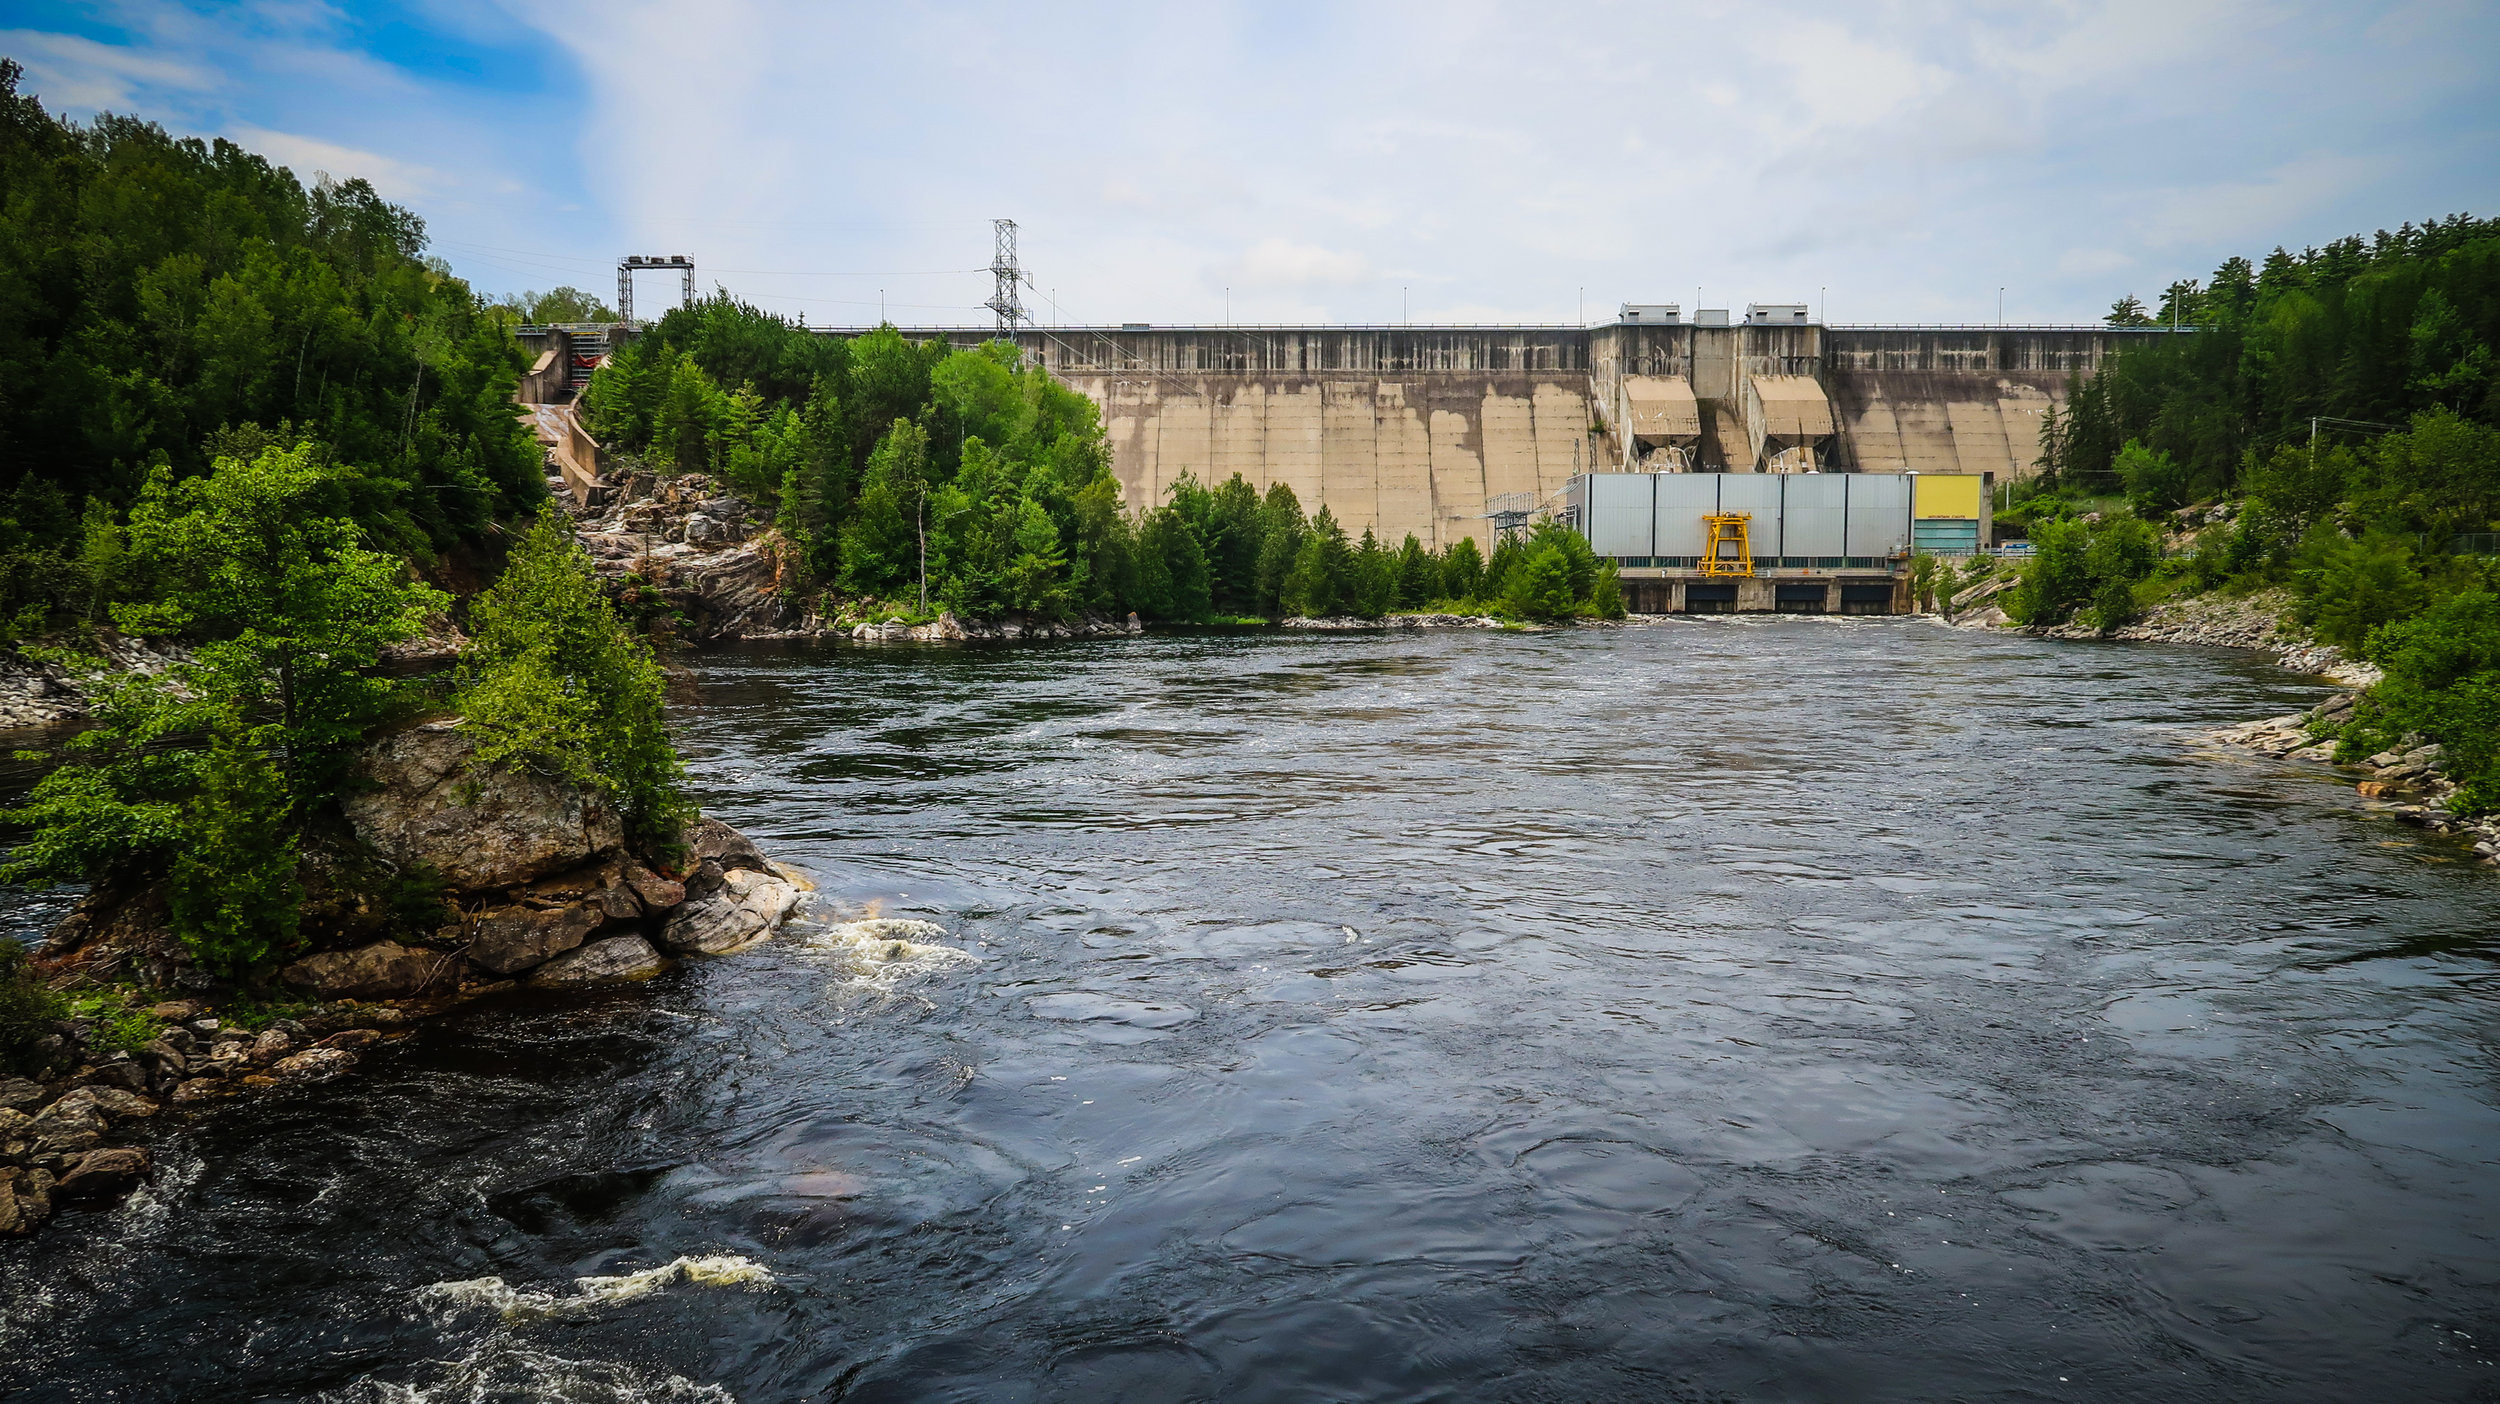  The Mountain Chute Dam is an impressive sight to see after a long bike ride. 